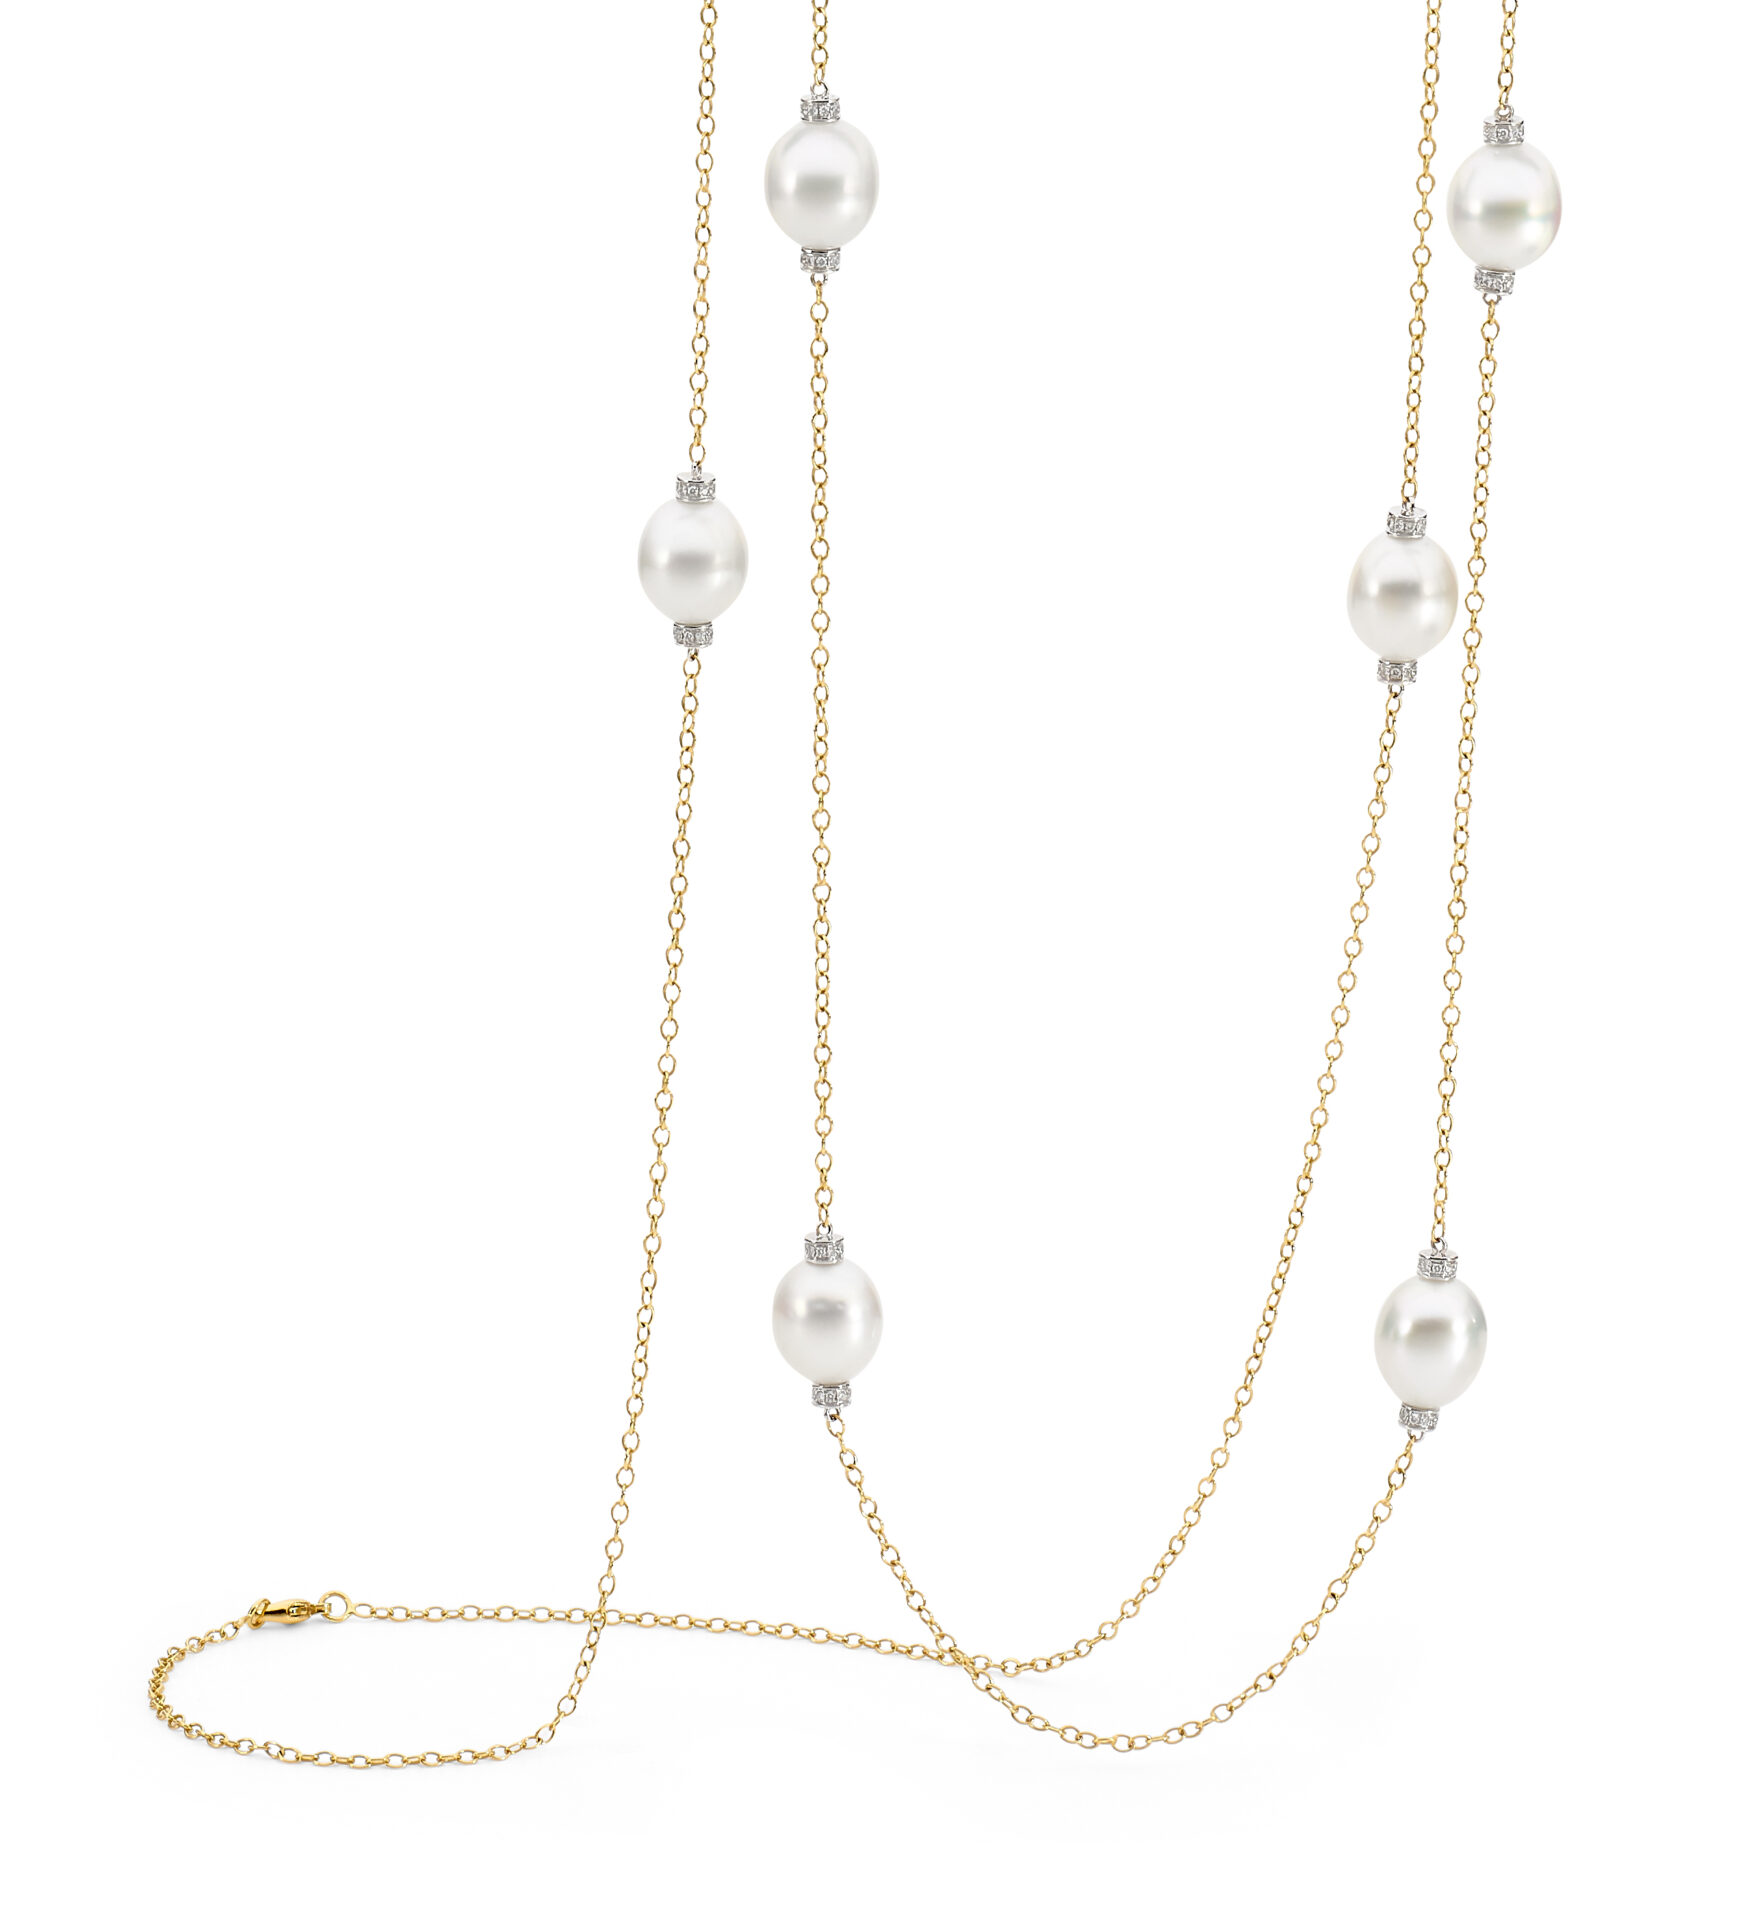 18ct Yellow Gold Diamond and Pearl Necklace - Allure South Sea Pearls